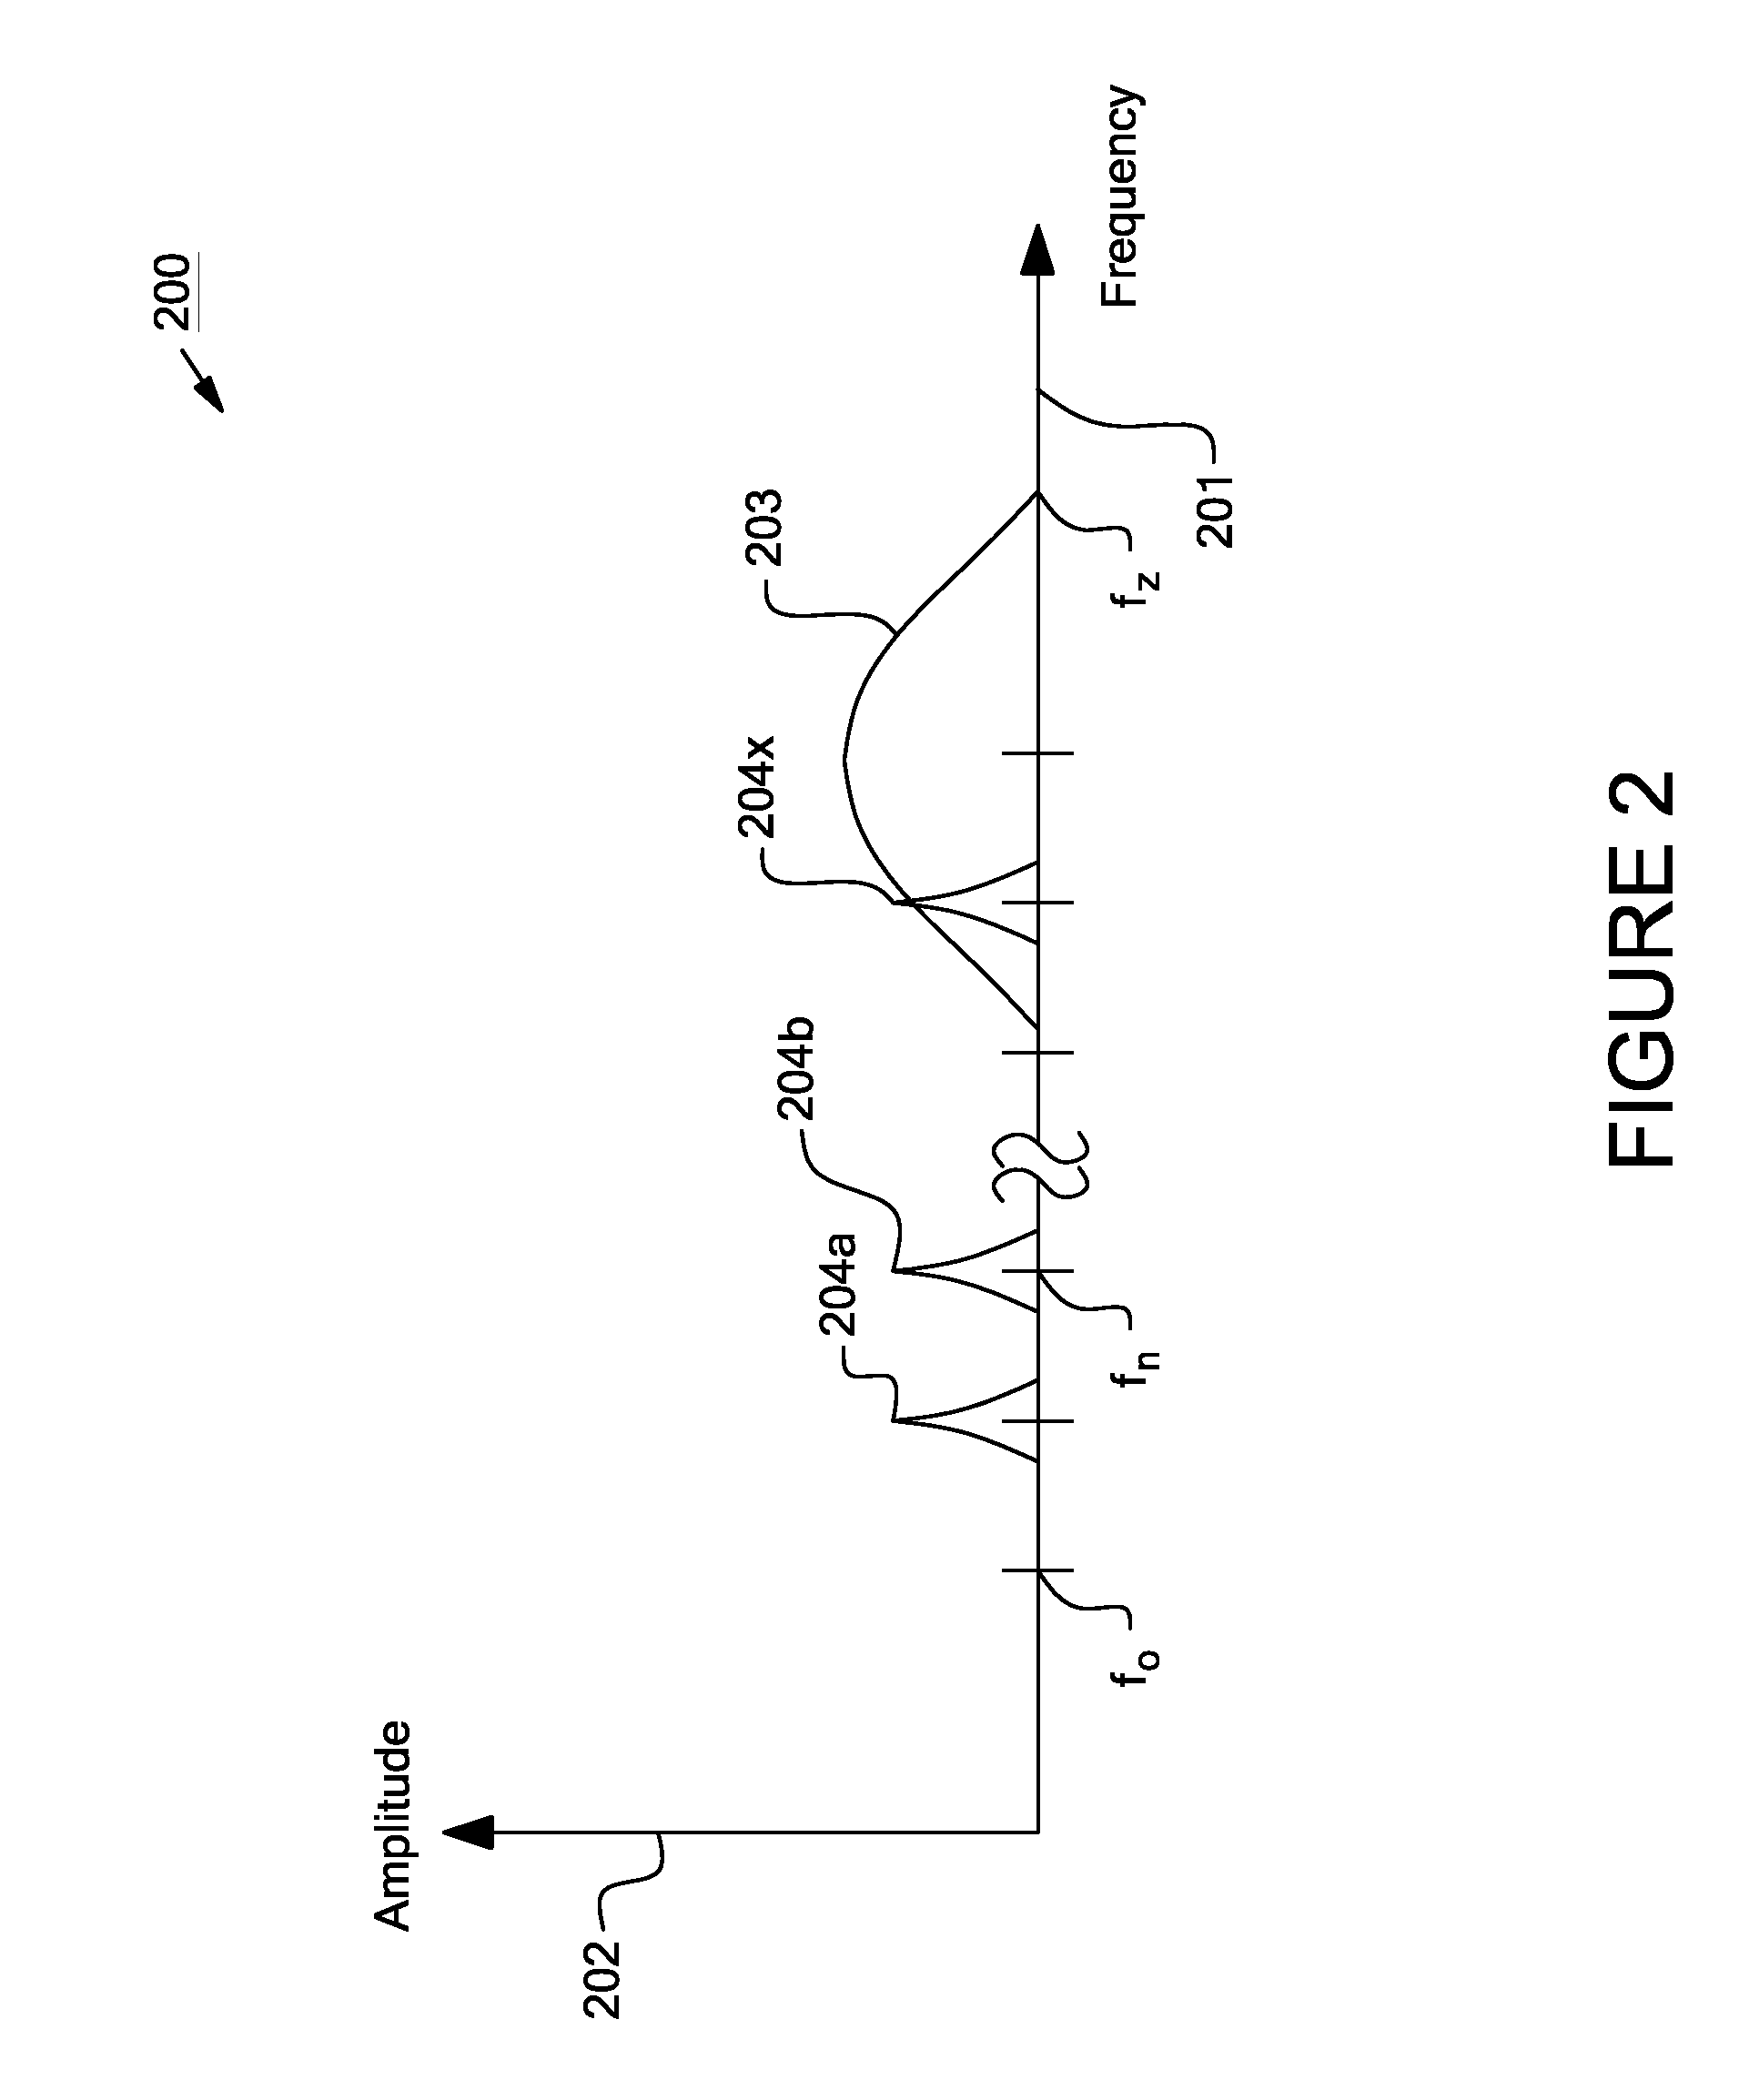 Systems and Methods for an Identification Protocol Between a Local Controller and a Master Controller